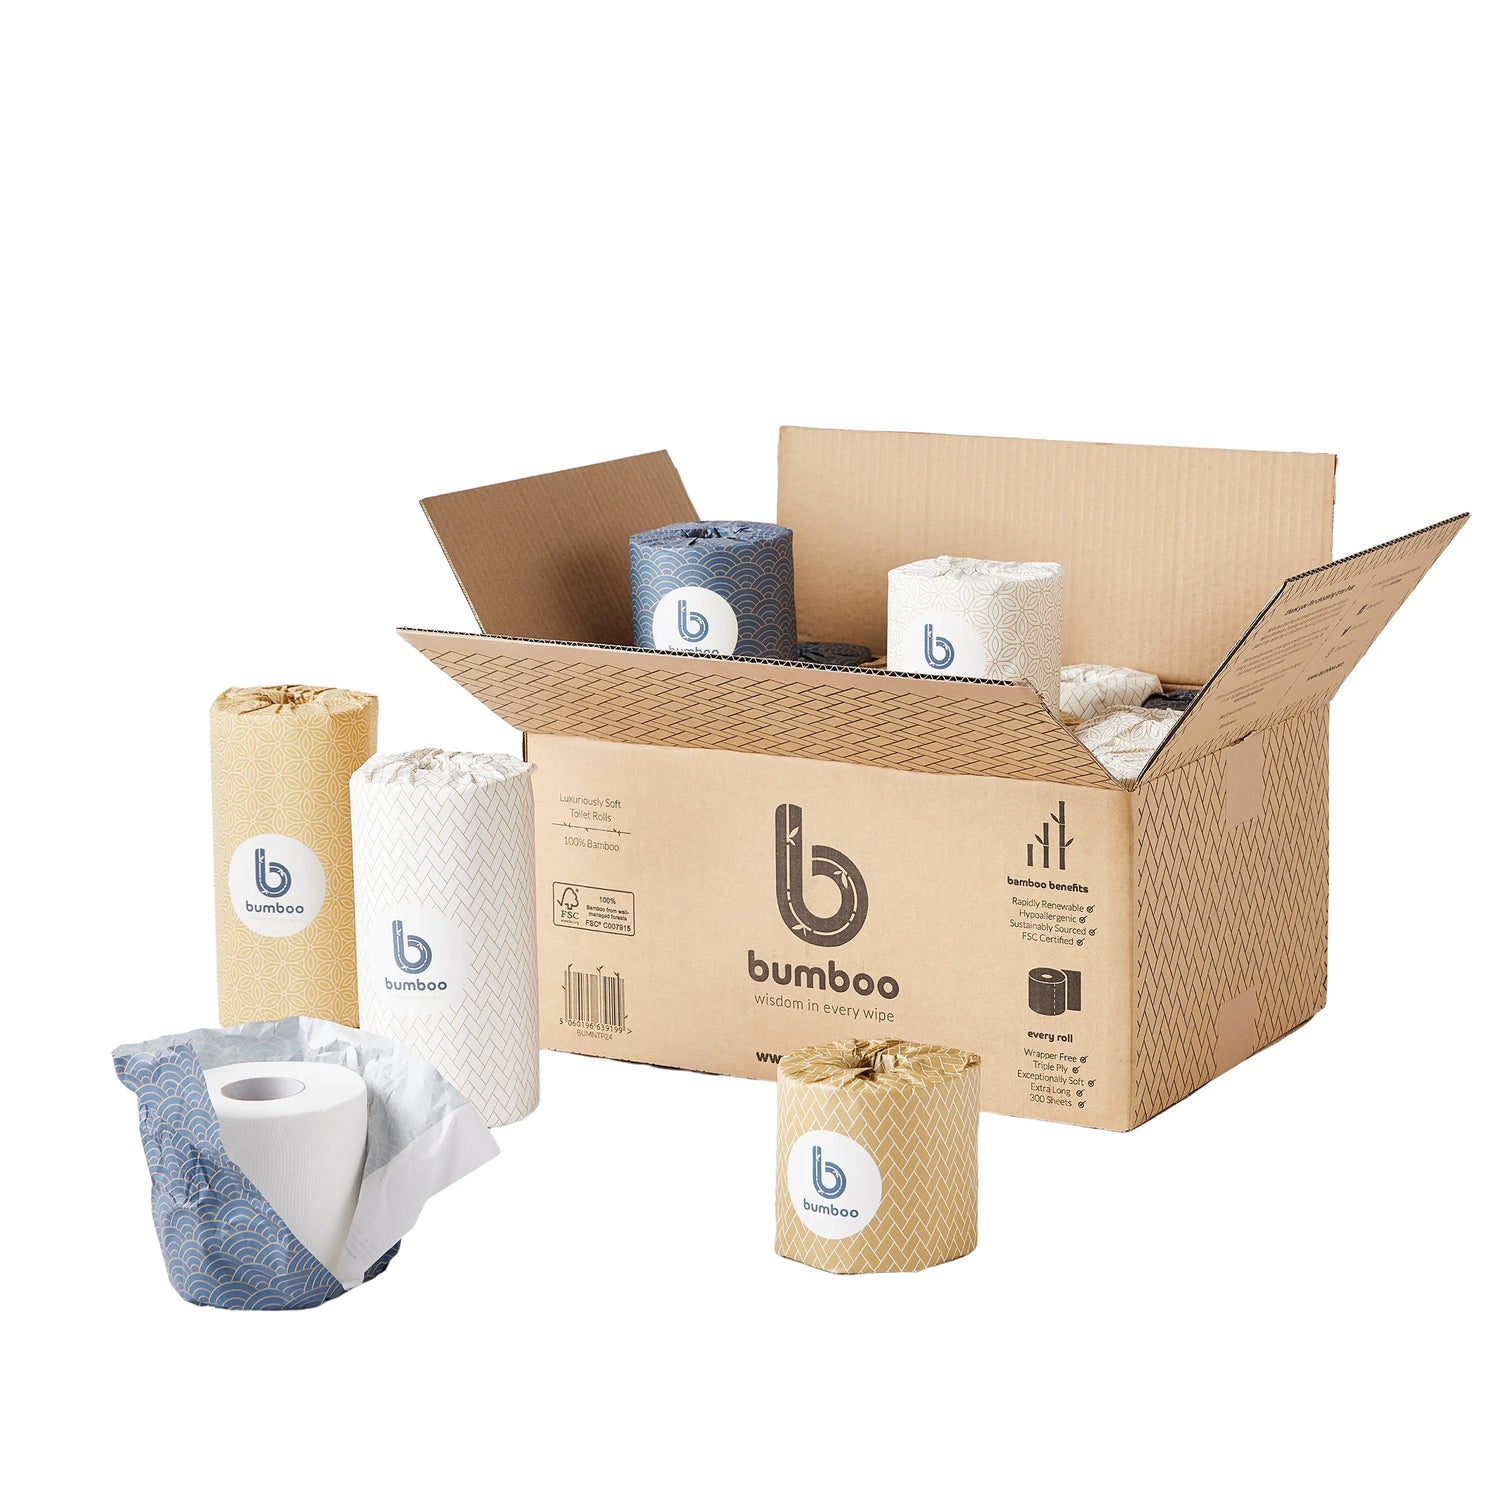 wrapped bamboo mixed box - toilet &amp; kitchen 20 pack